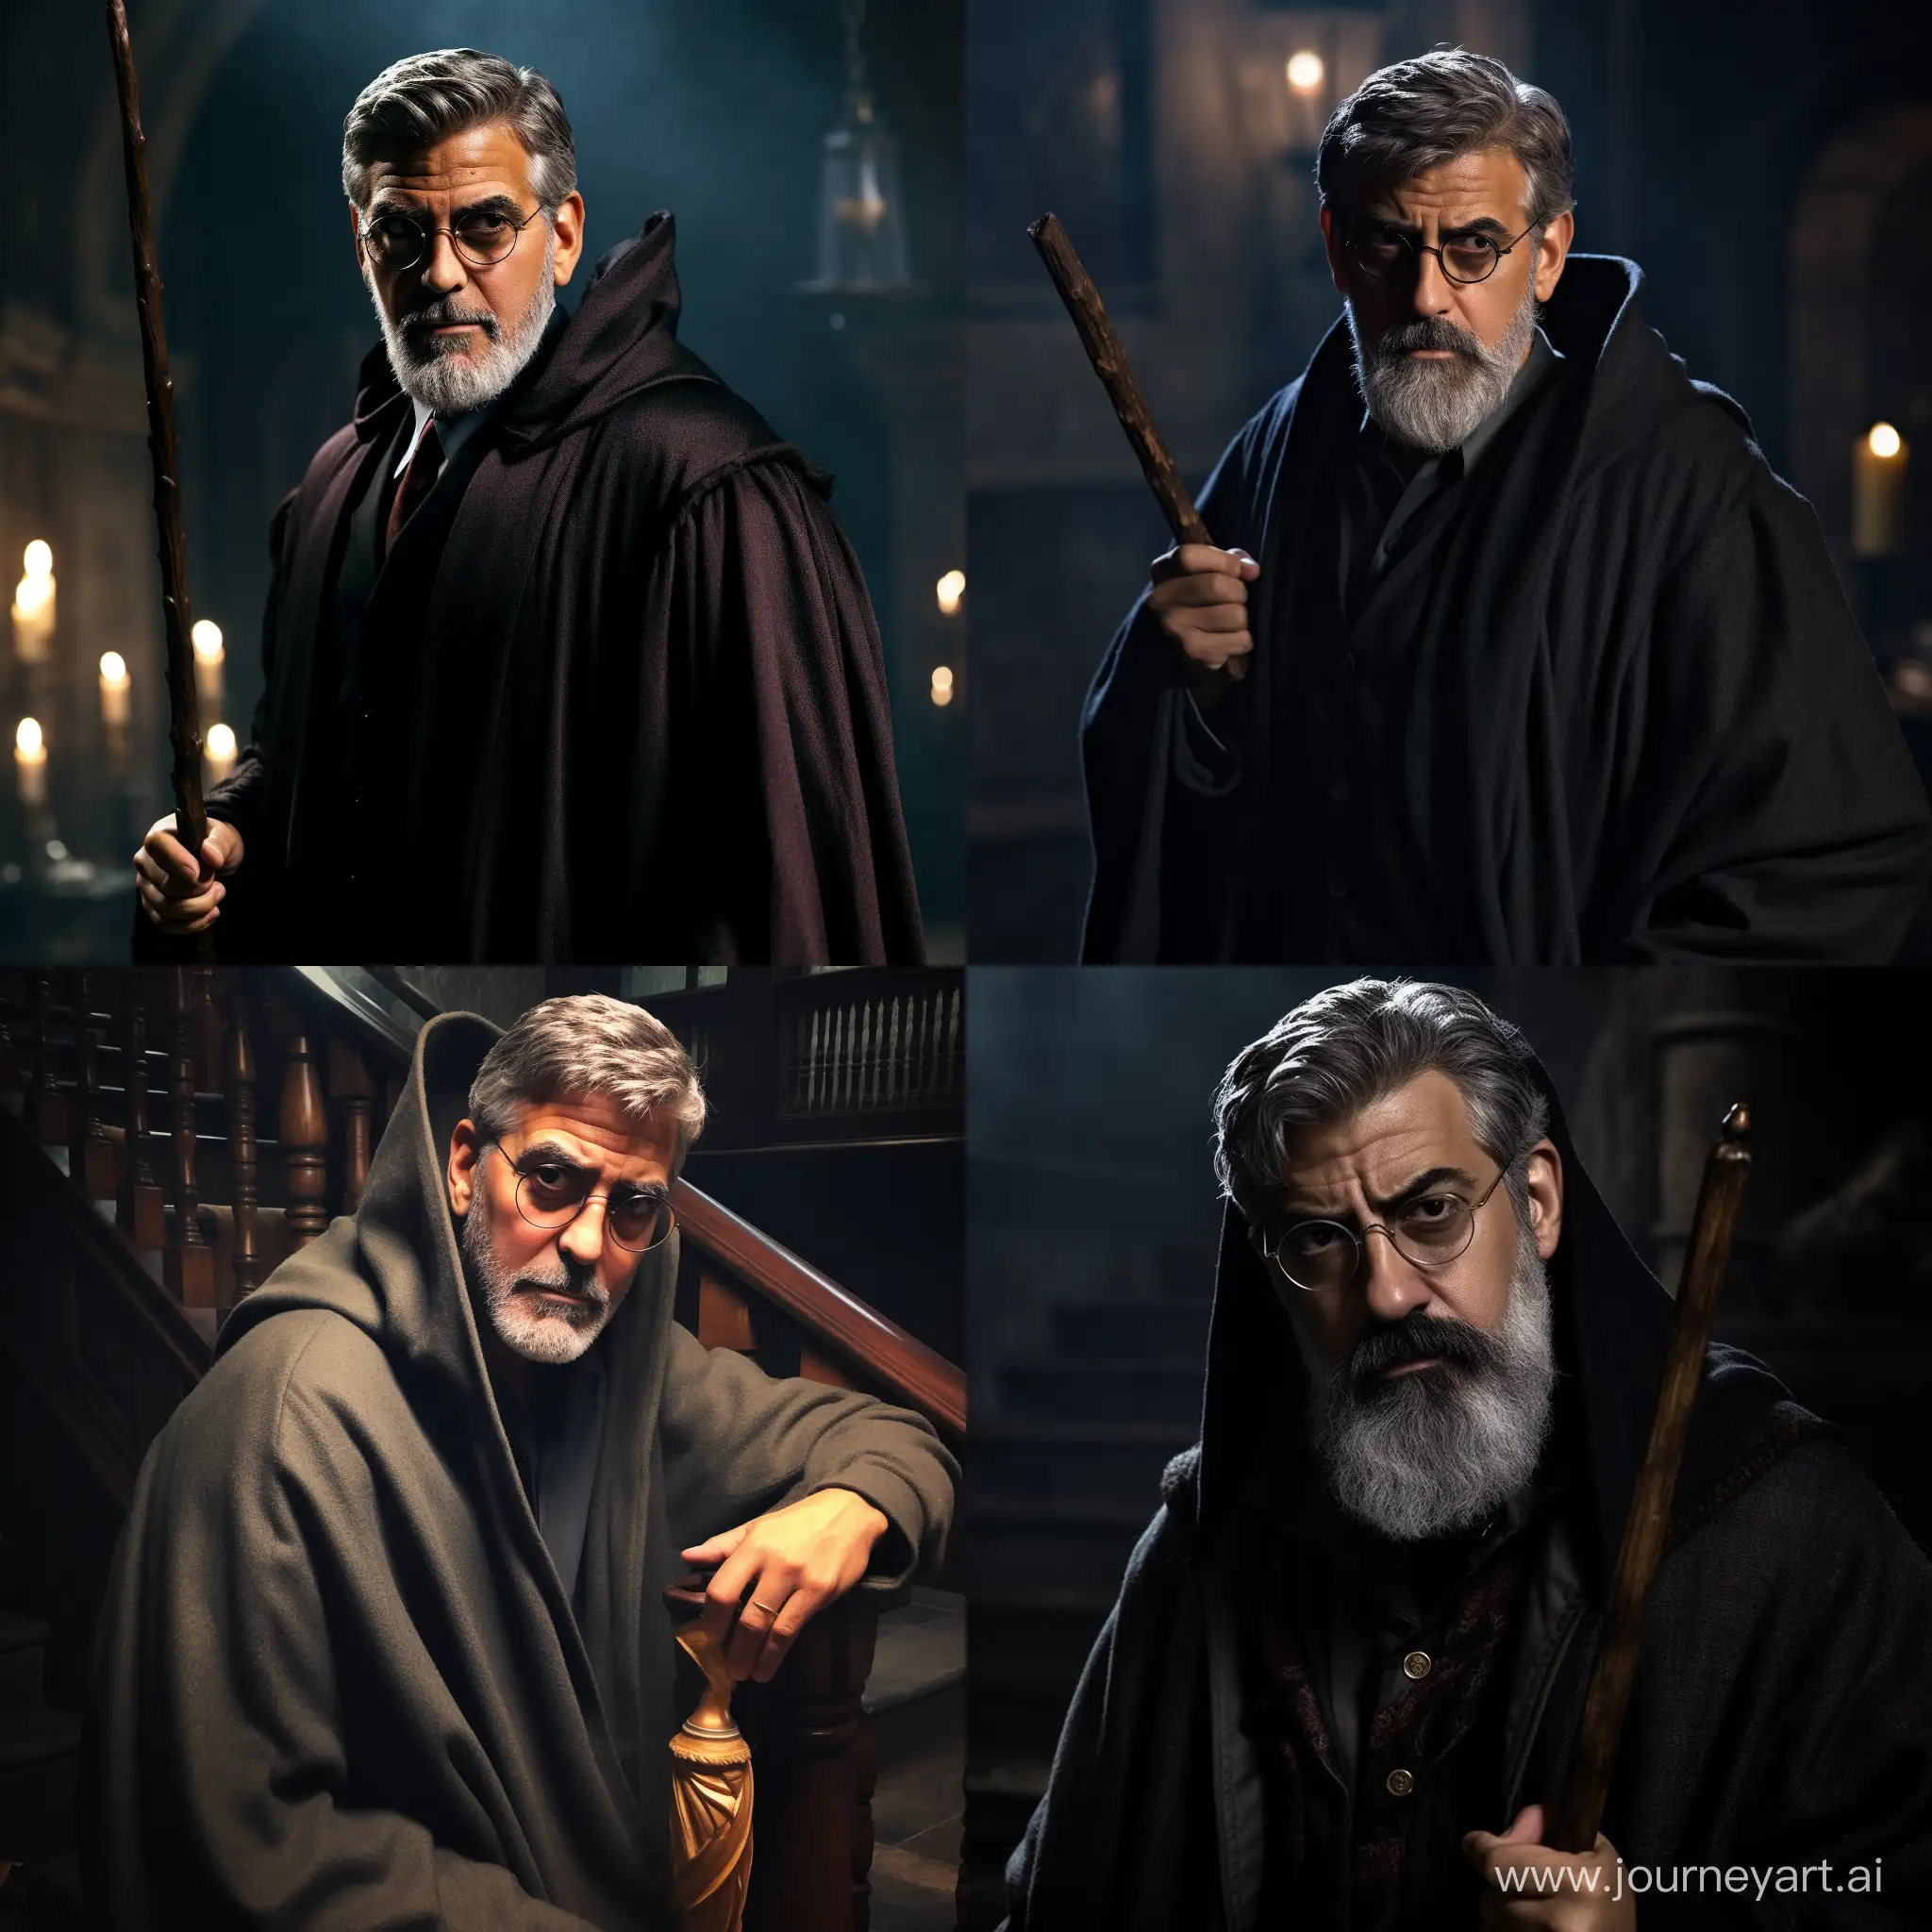 George Clooney dressed up as Harry Potter